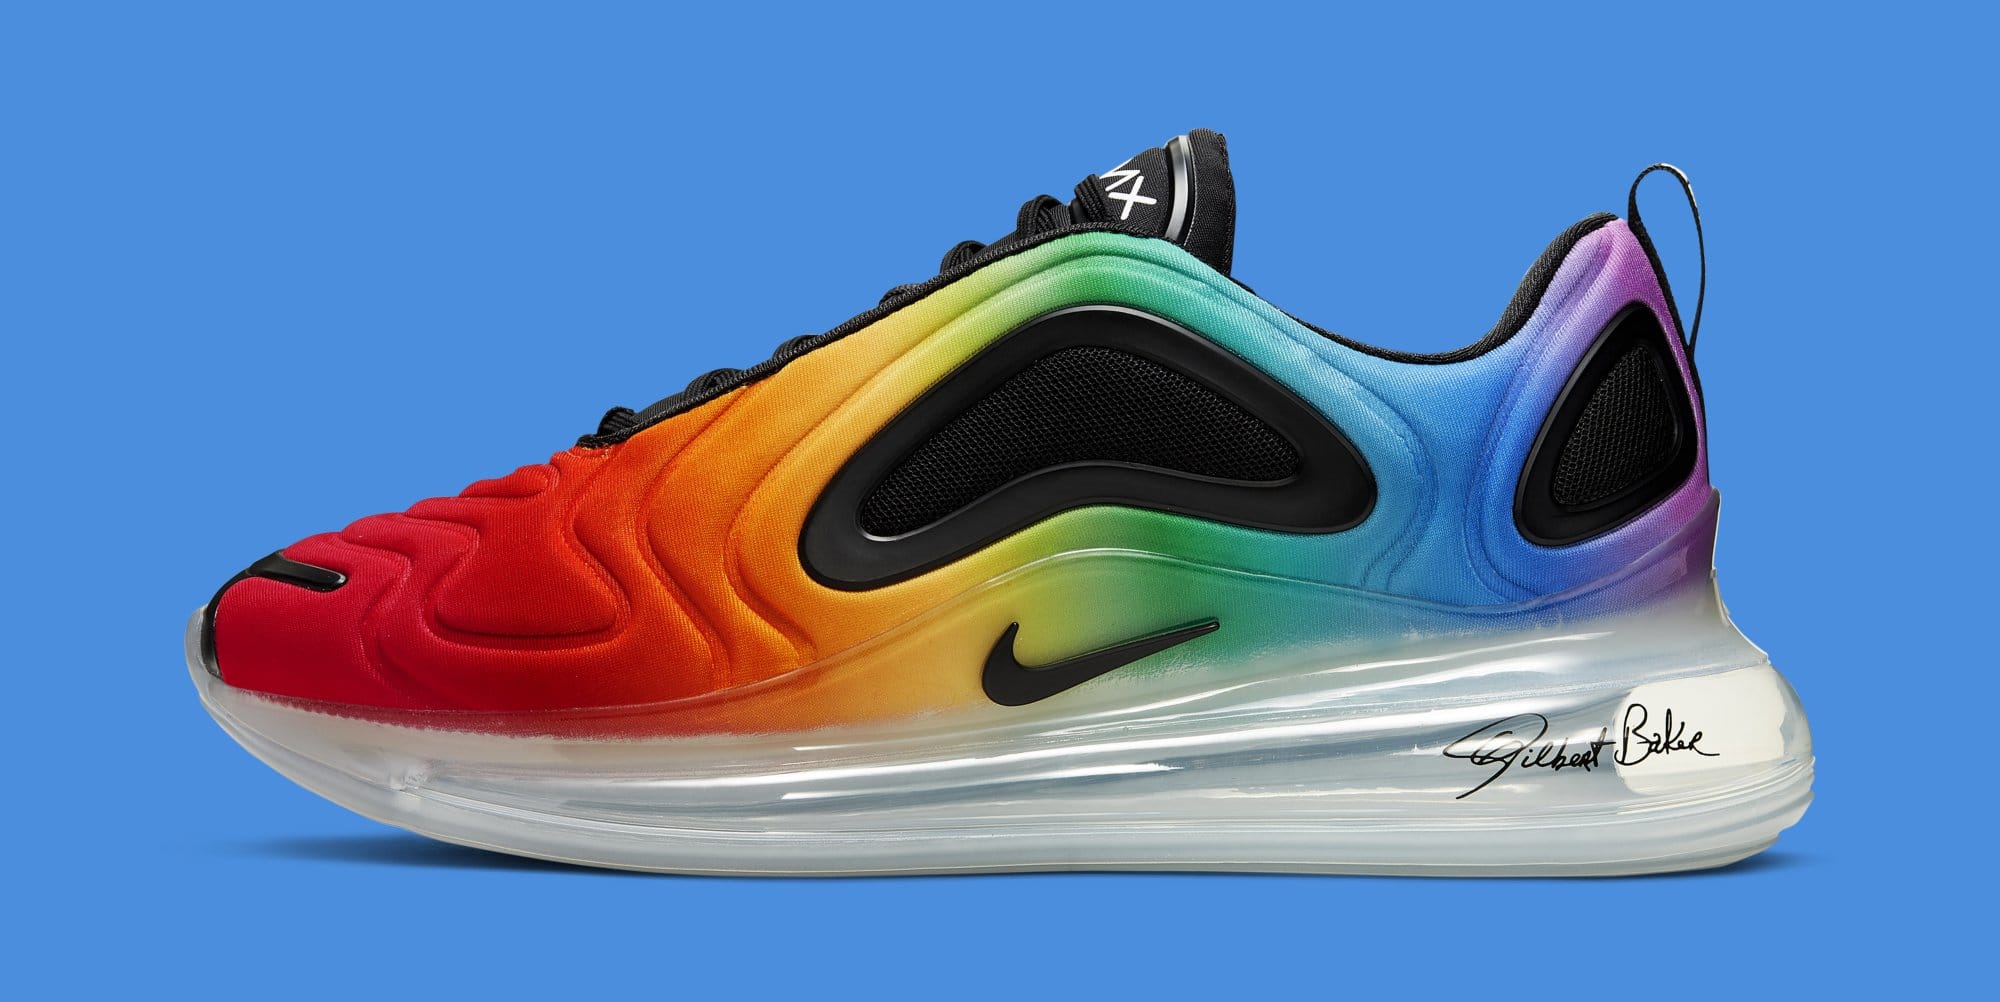 Nike Air Max 720 &quot;Be True&quot; Drops Just In Time For Pride Month: Details